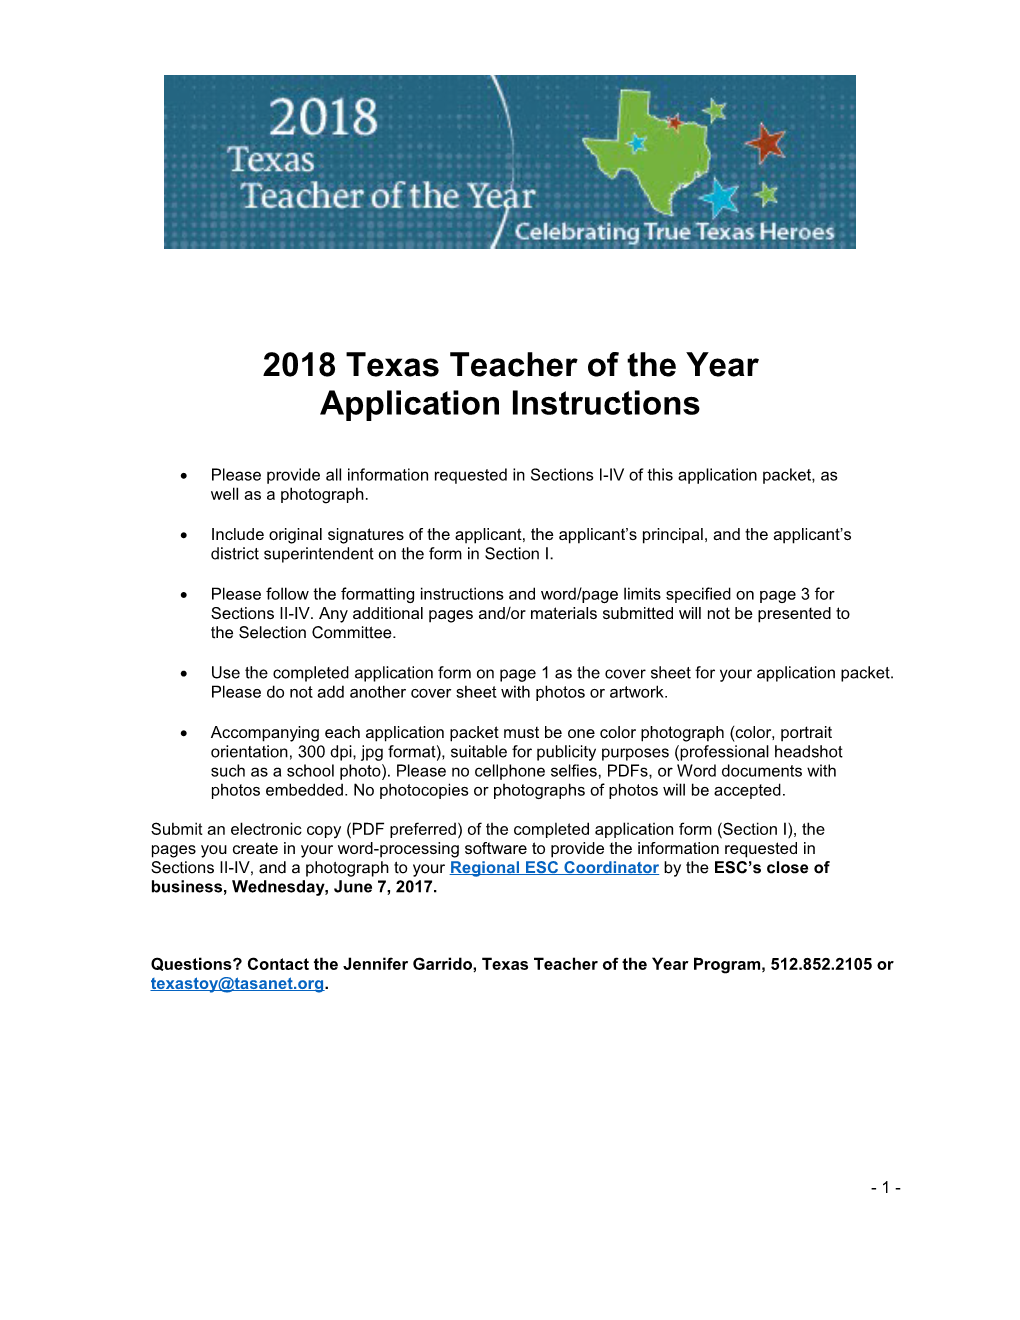 2018Texas Teacher of the Year Application Instructions